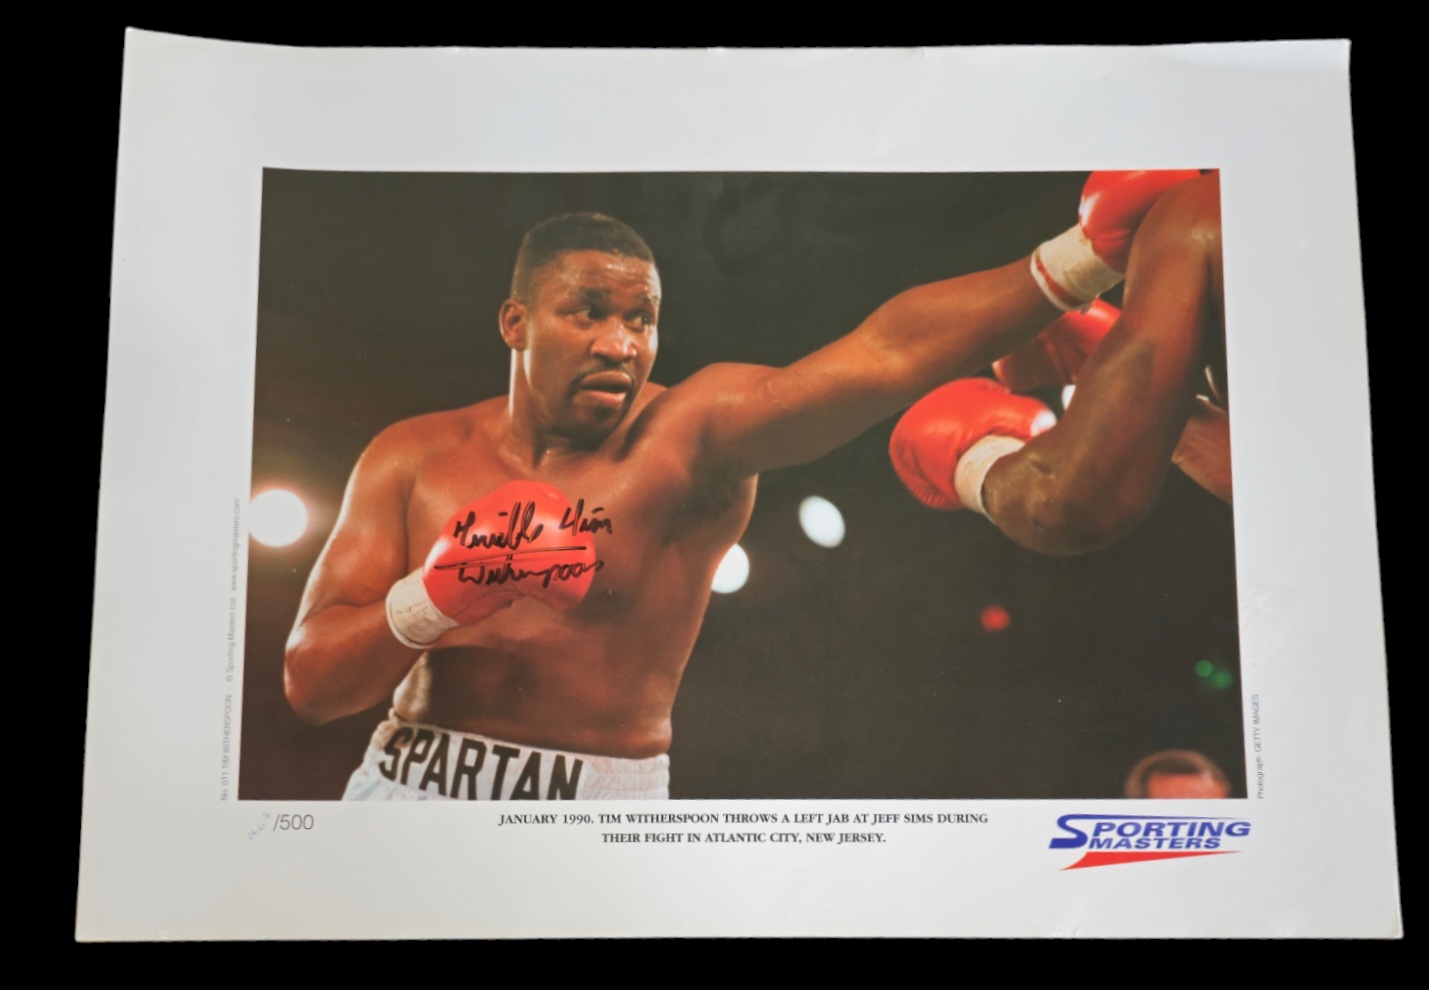 Tim Witherspoon signed 22x16 inch Sporting Masters limited edition print 467/500. Good Condition.